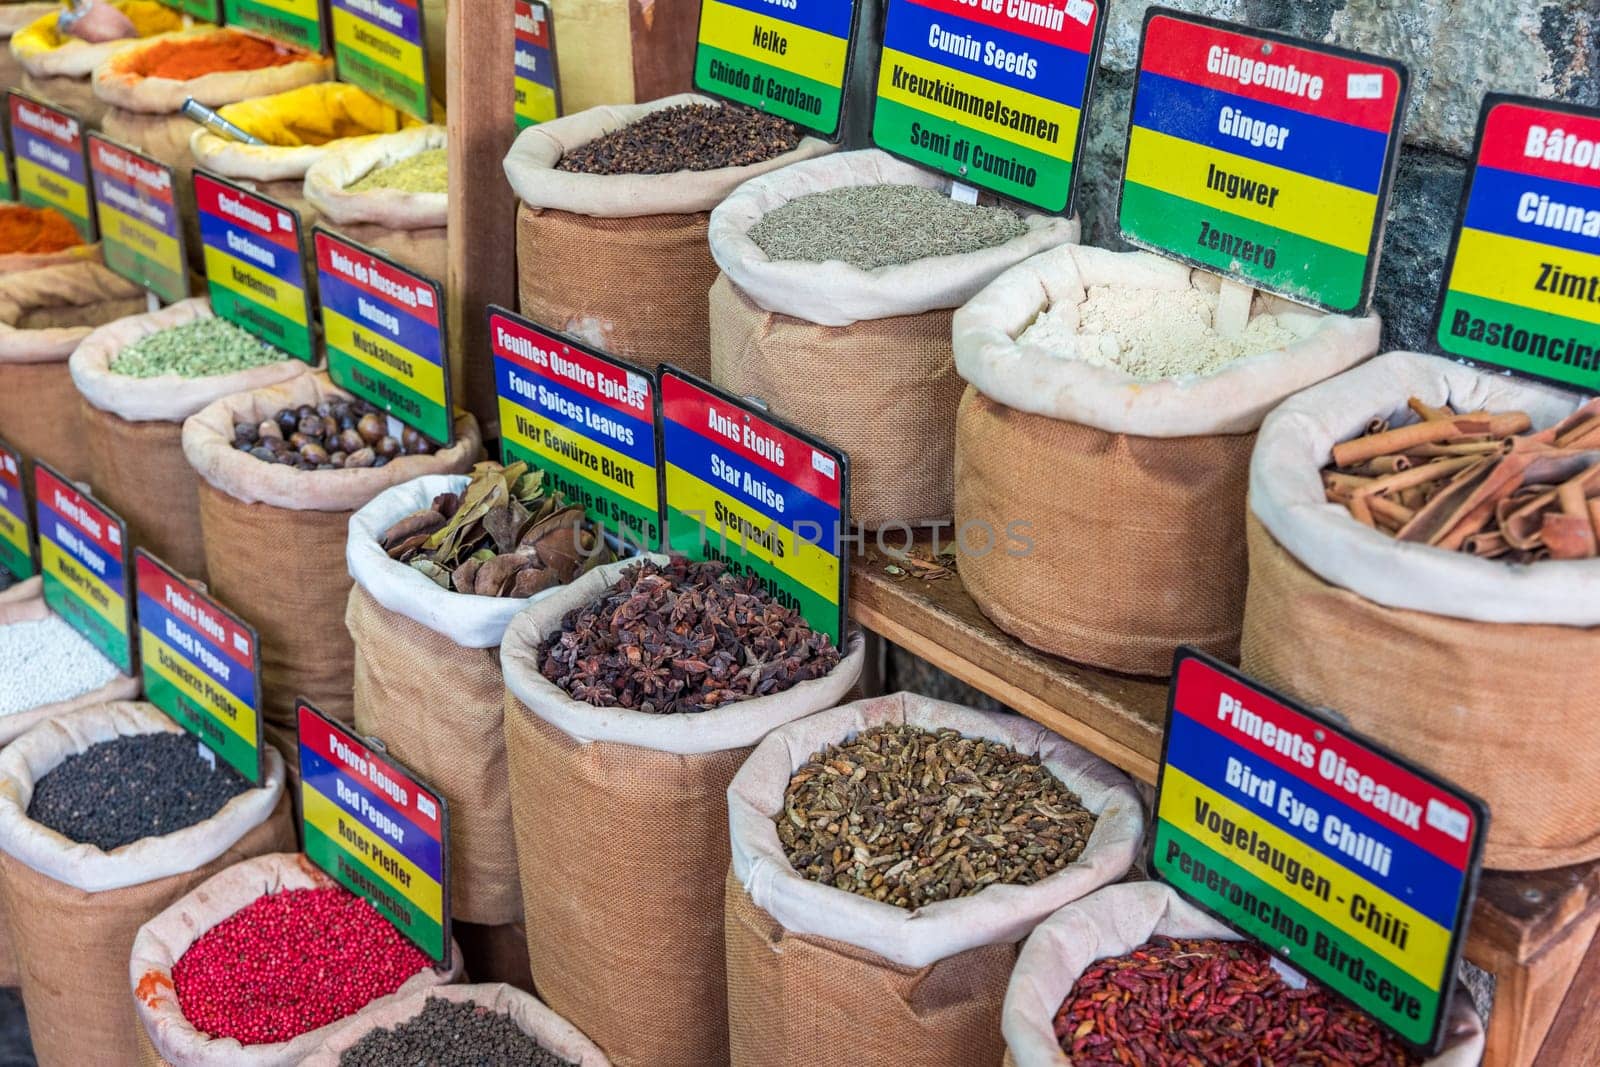 A colorful display of spices and herbs, including cumin, coriander, and ginger. The spices are arranged in small bags and baskets, and there are signs next to each one indicating their names and uses by DaLiu